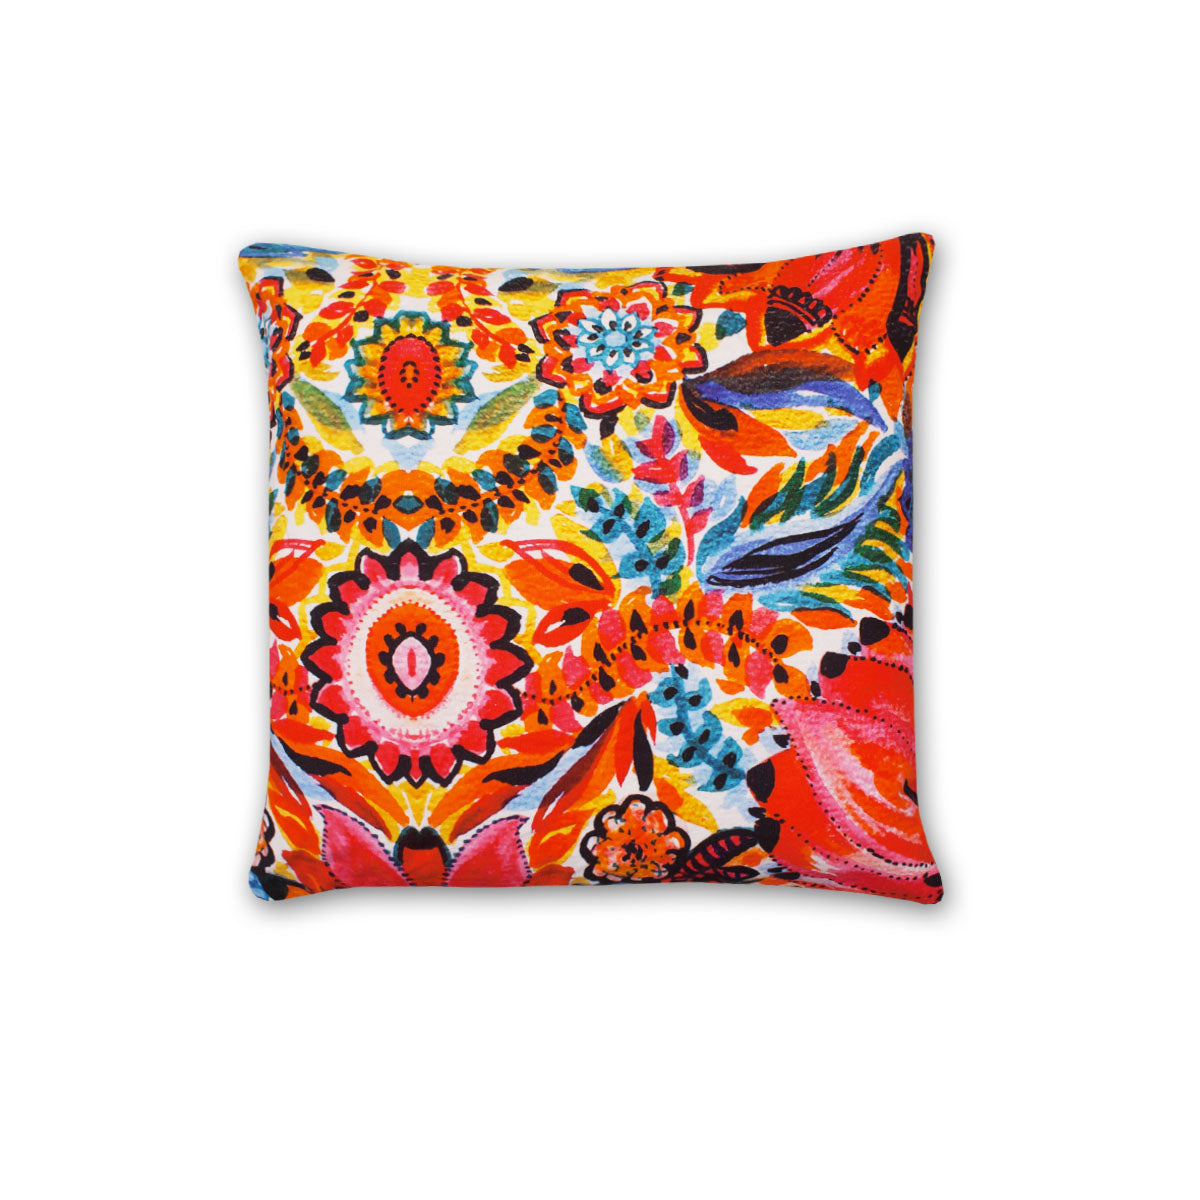 Copy of Purple Indian Art Cushion Cover